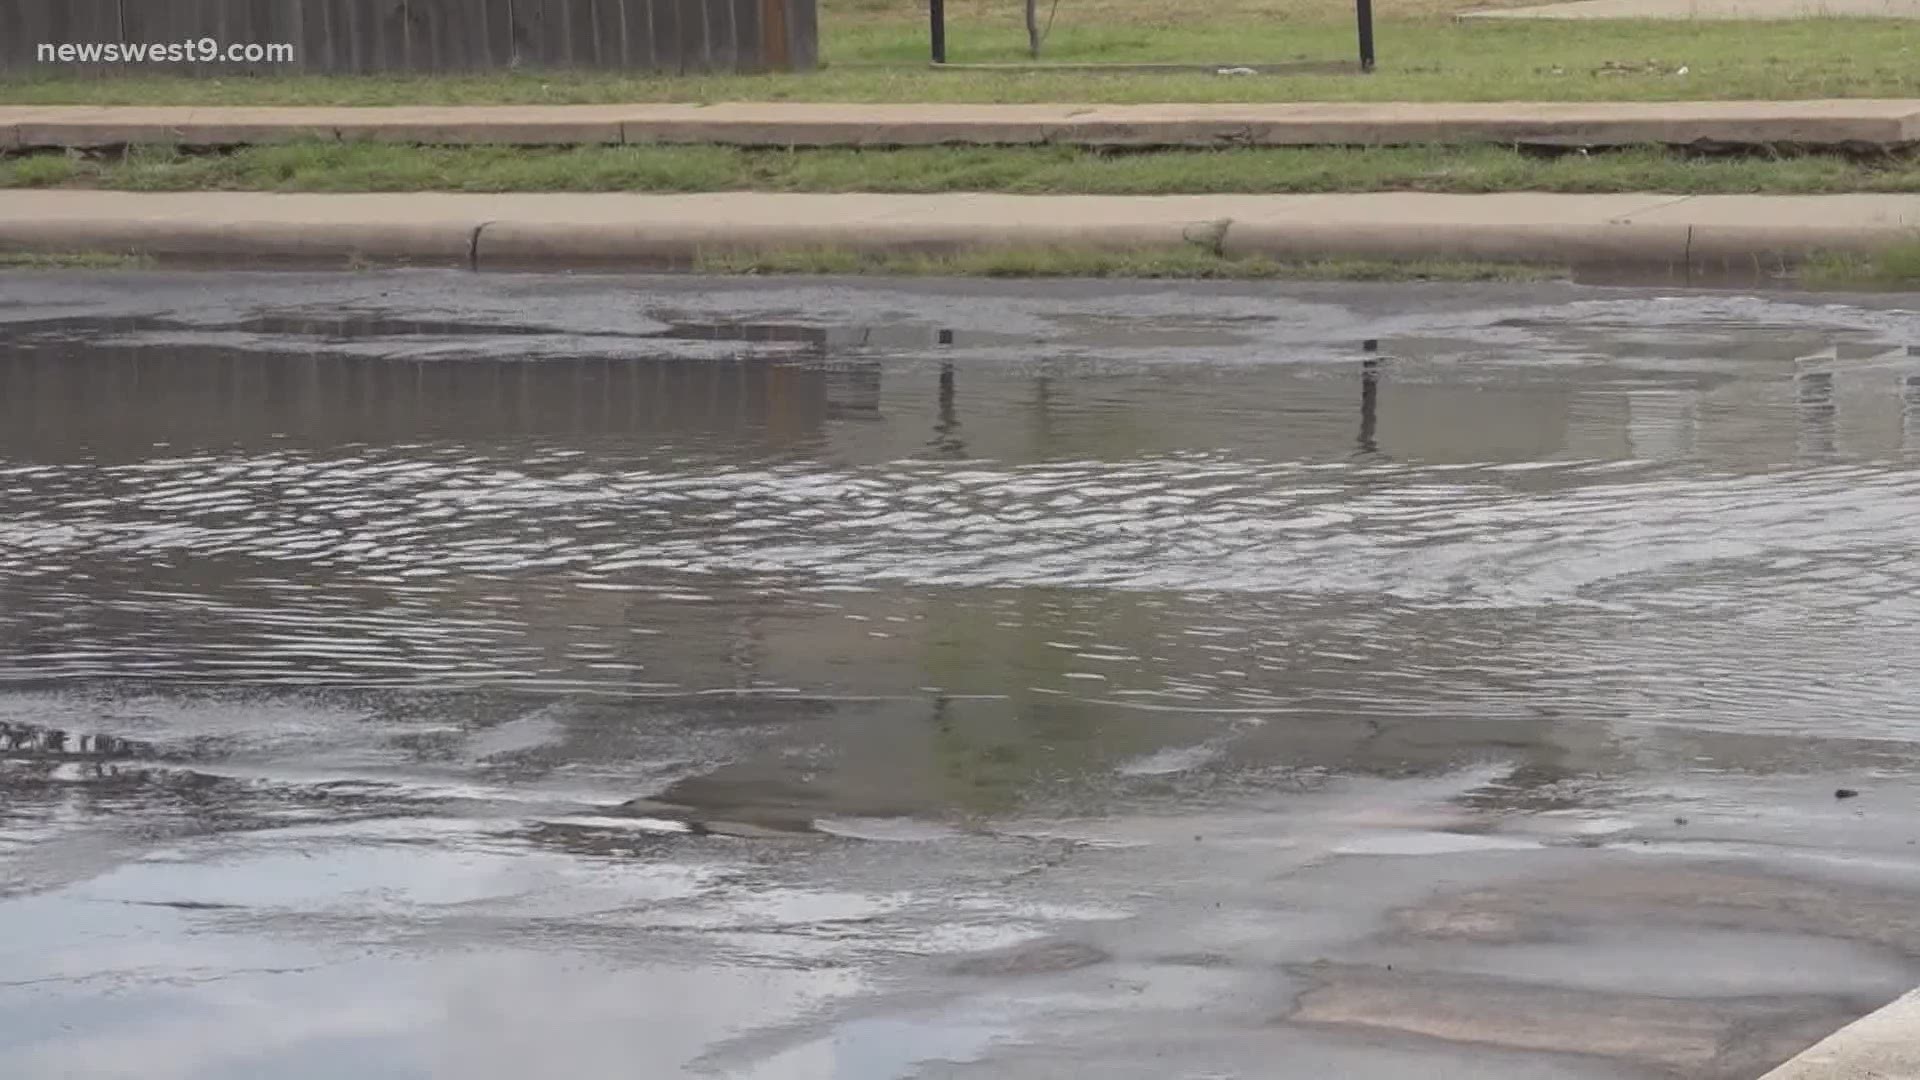 With all of the rain came flooded streets and neighborhoods, leading some to ask if the City of Odessa could do more to prevent future flooding.